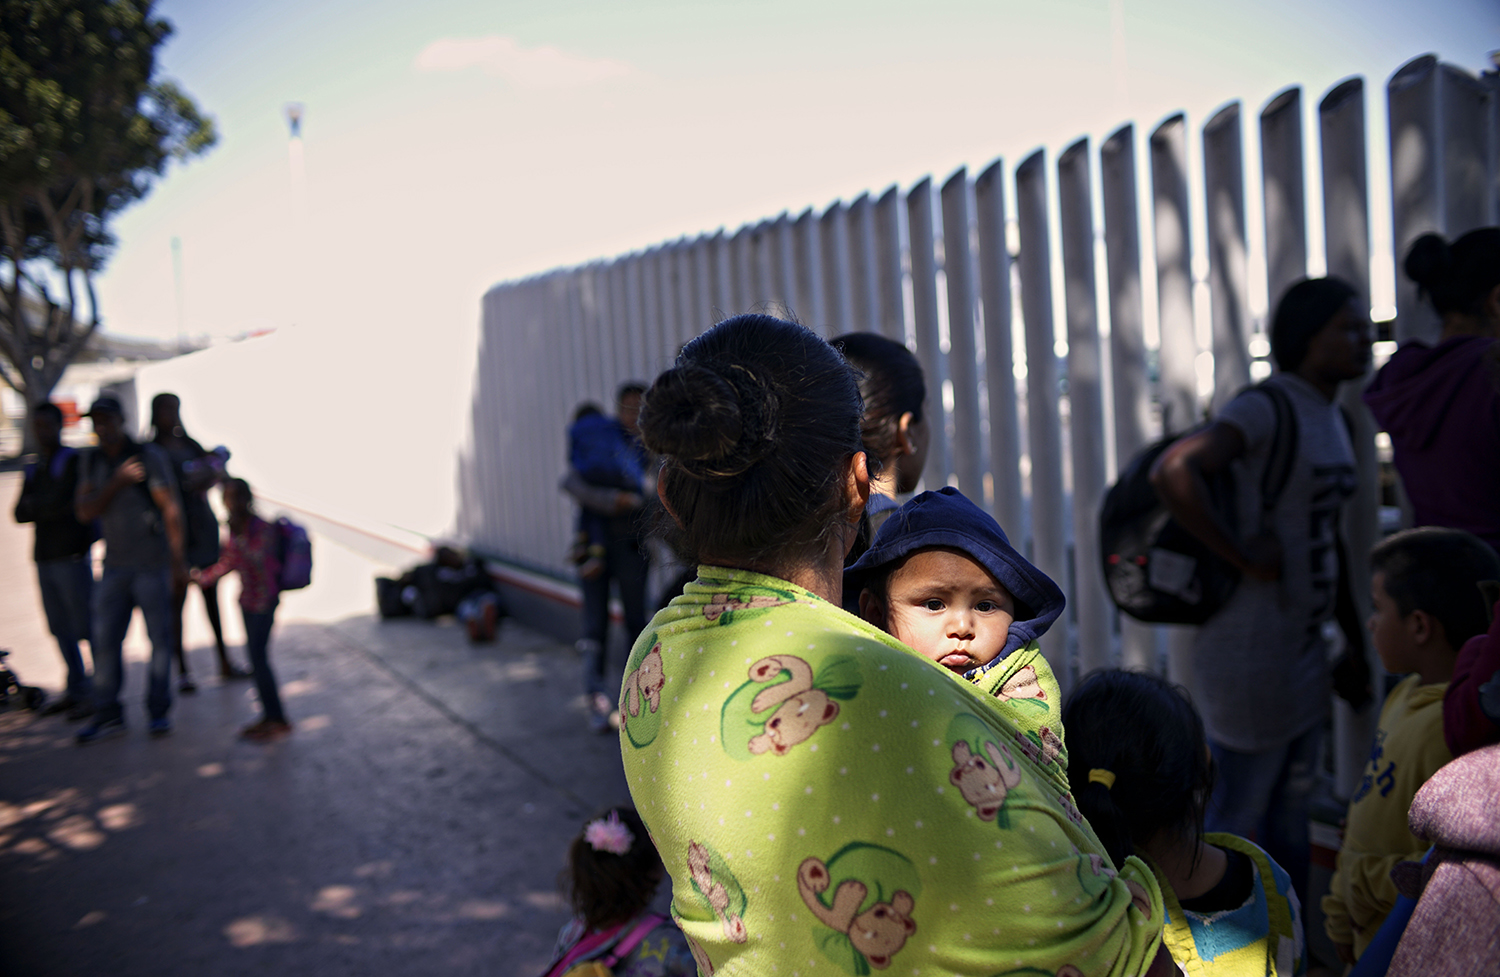 A photo of a woman's back as she holds a baby standing near a fence as others wait in line